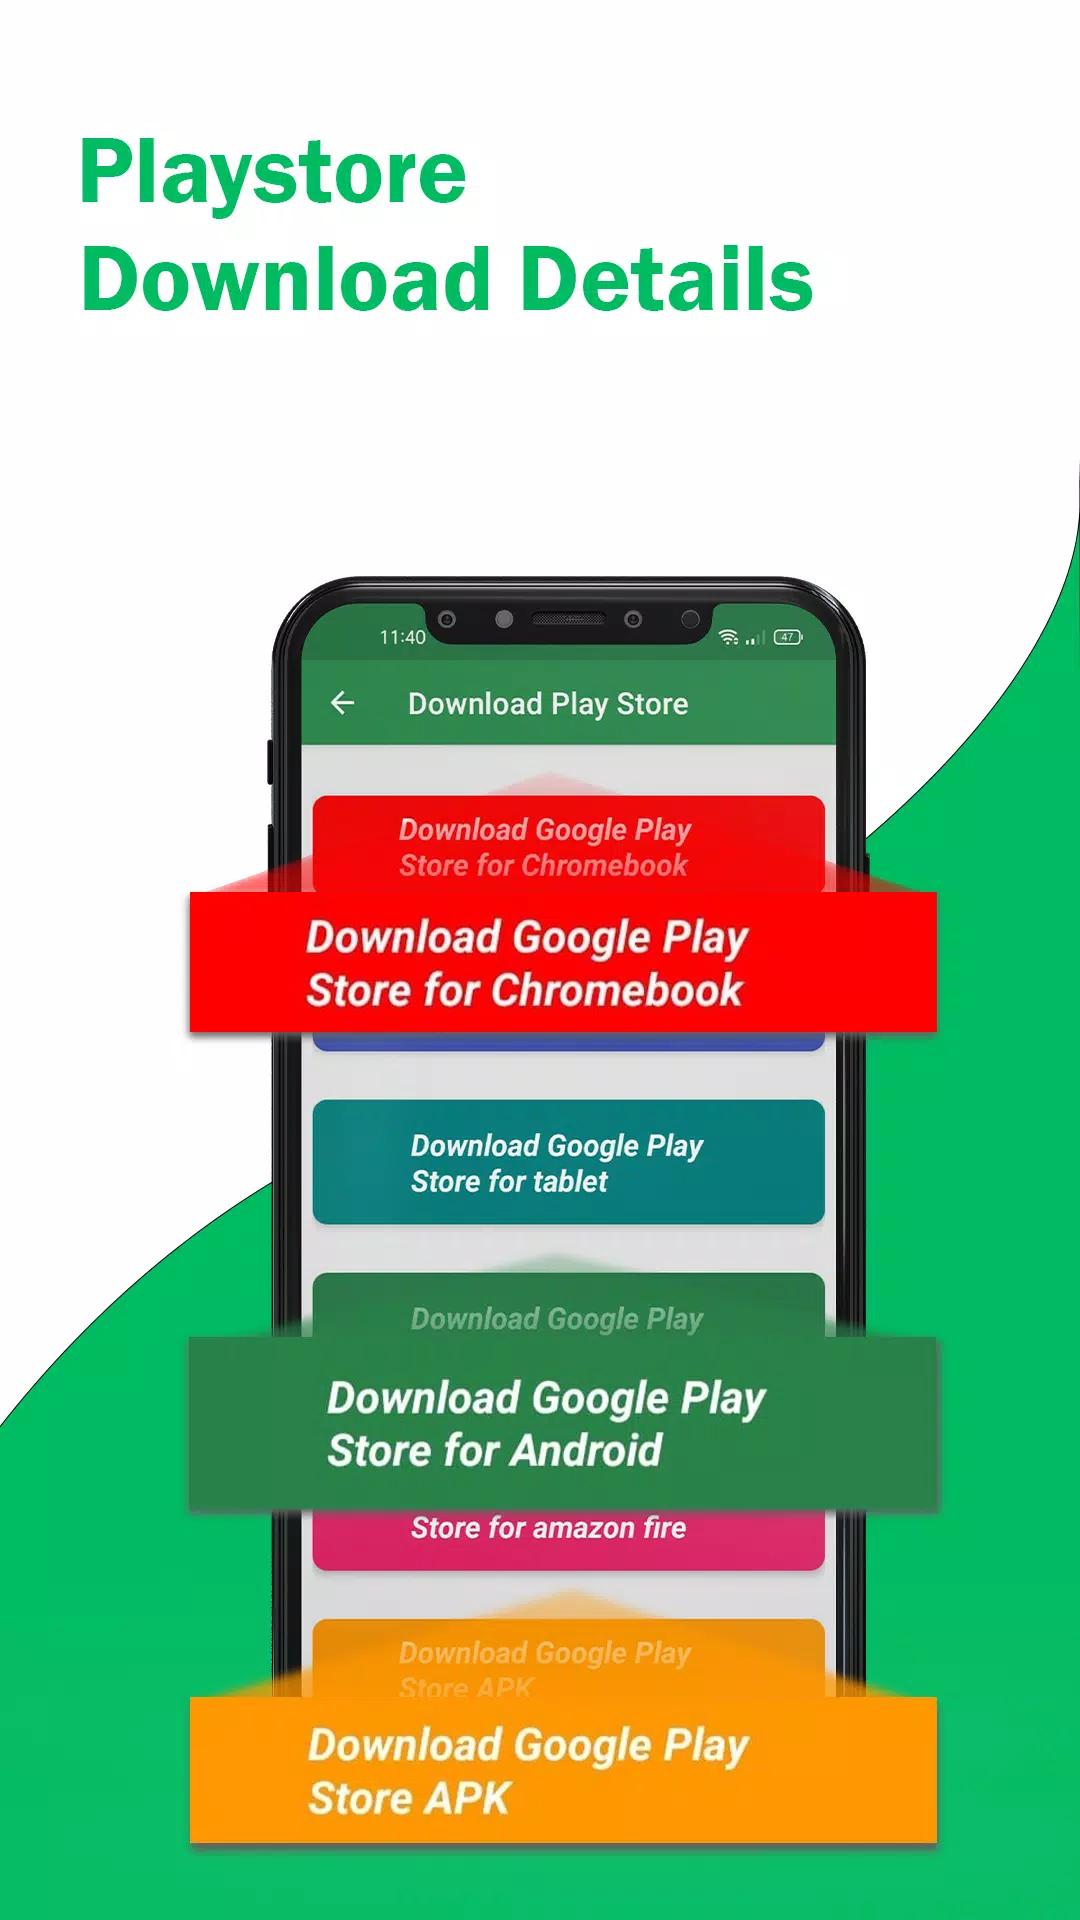 Google Play Store APK 9.1.24 Download On Android: Here's How To Install It